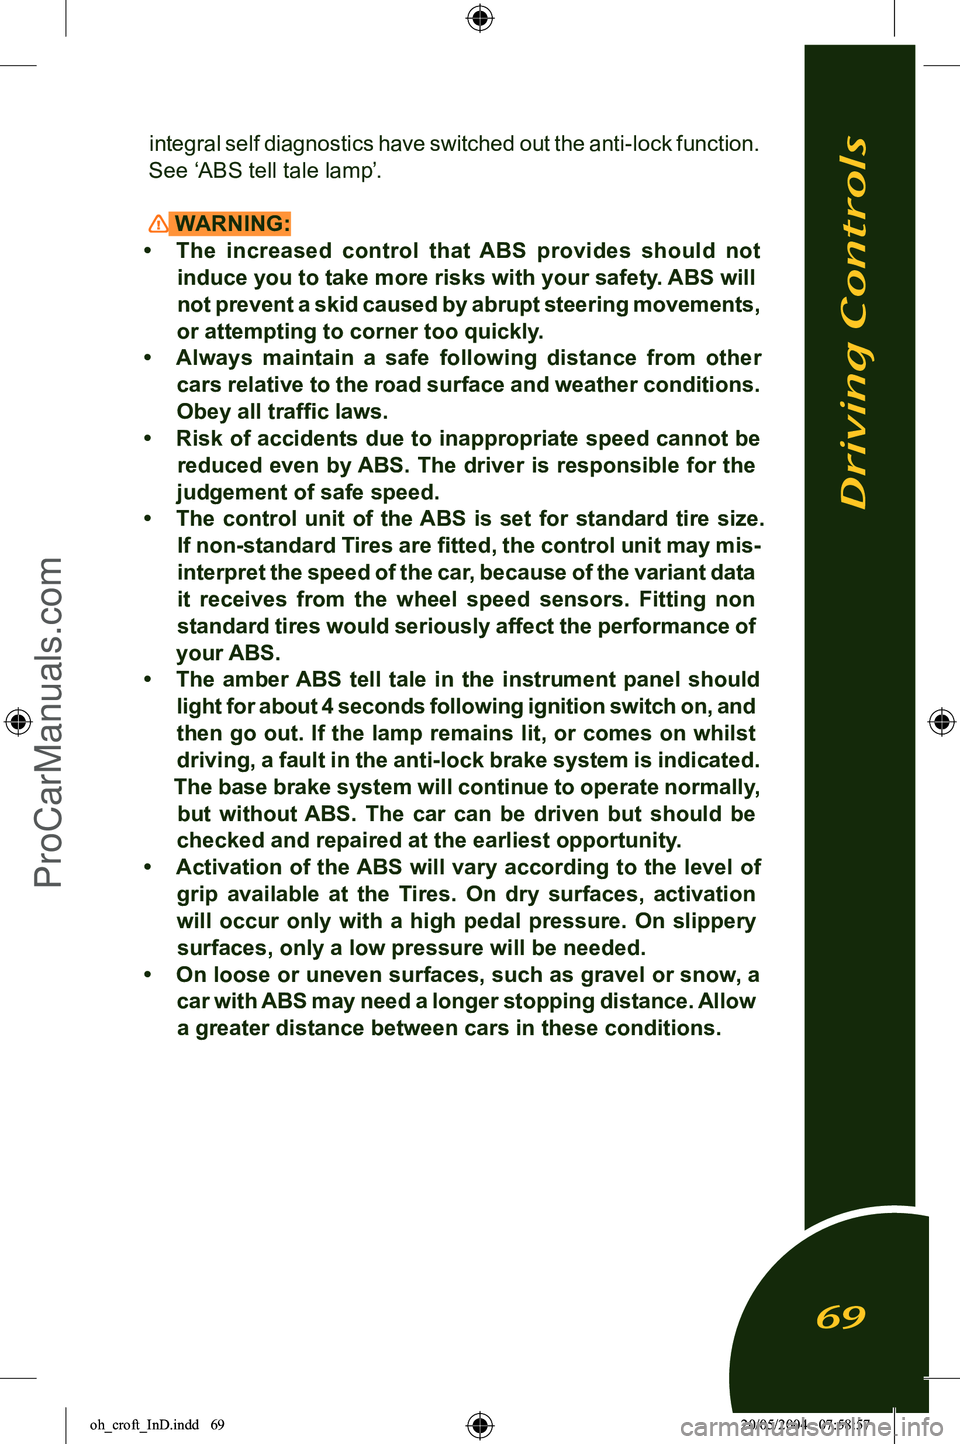 LOTUS ELISE 2005  Owners Manual 
integral self diagnostics have switched out the anti-lock function. 
See ‘ABS tell tale lamp’.
 WARNING:
•  The  increased  control  that  ABS  provides  should  not  induce you to take more ri